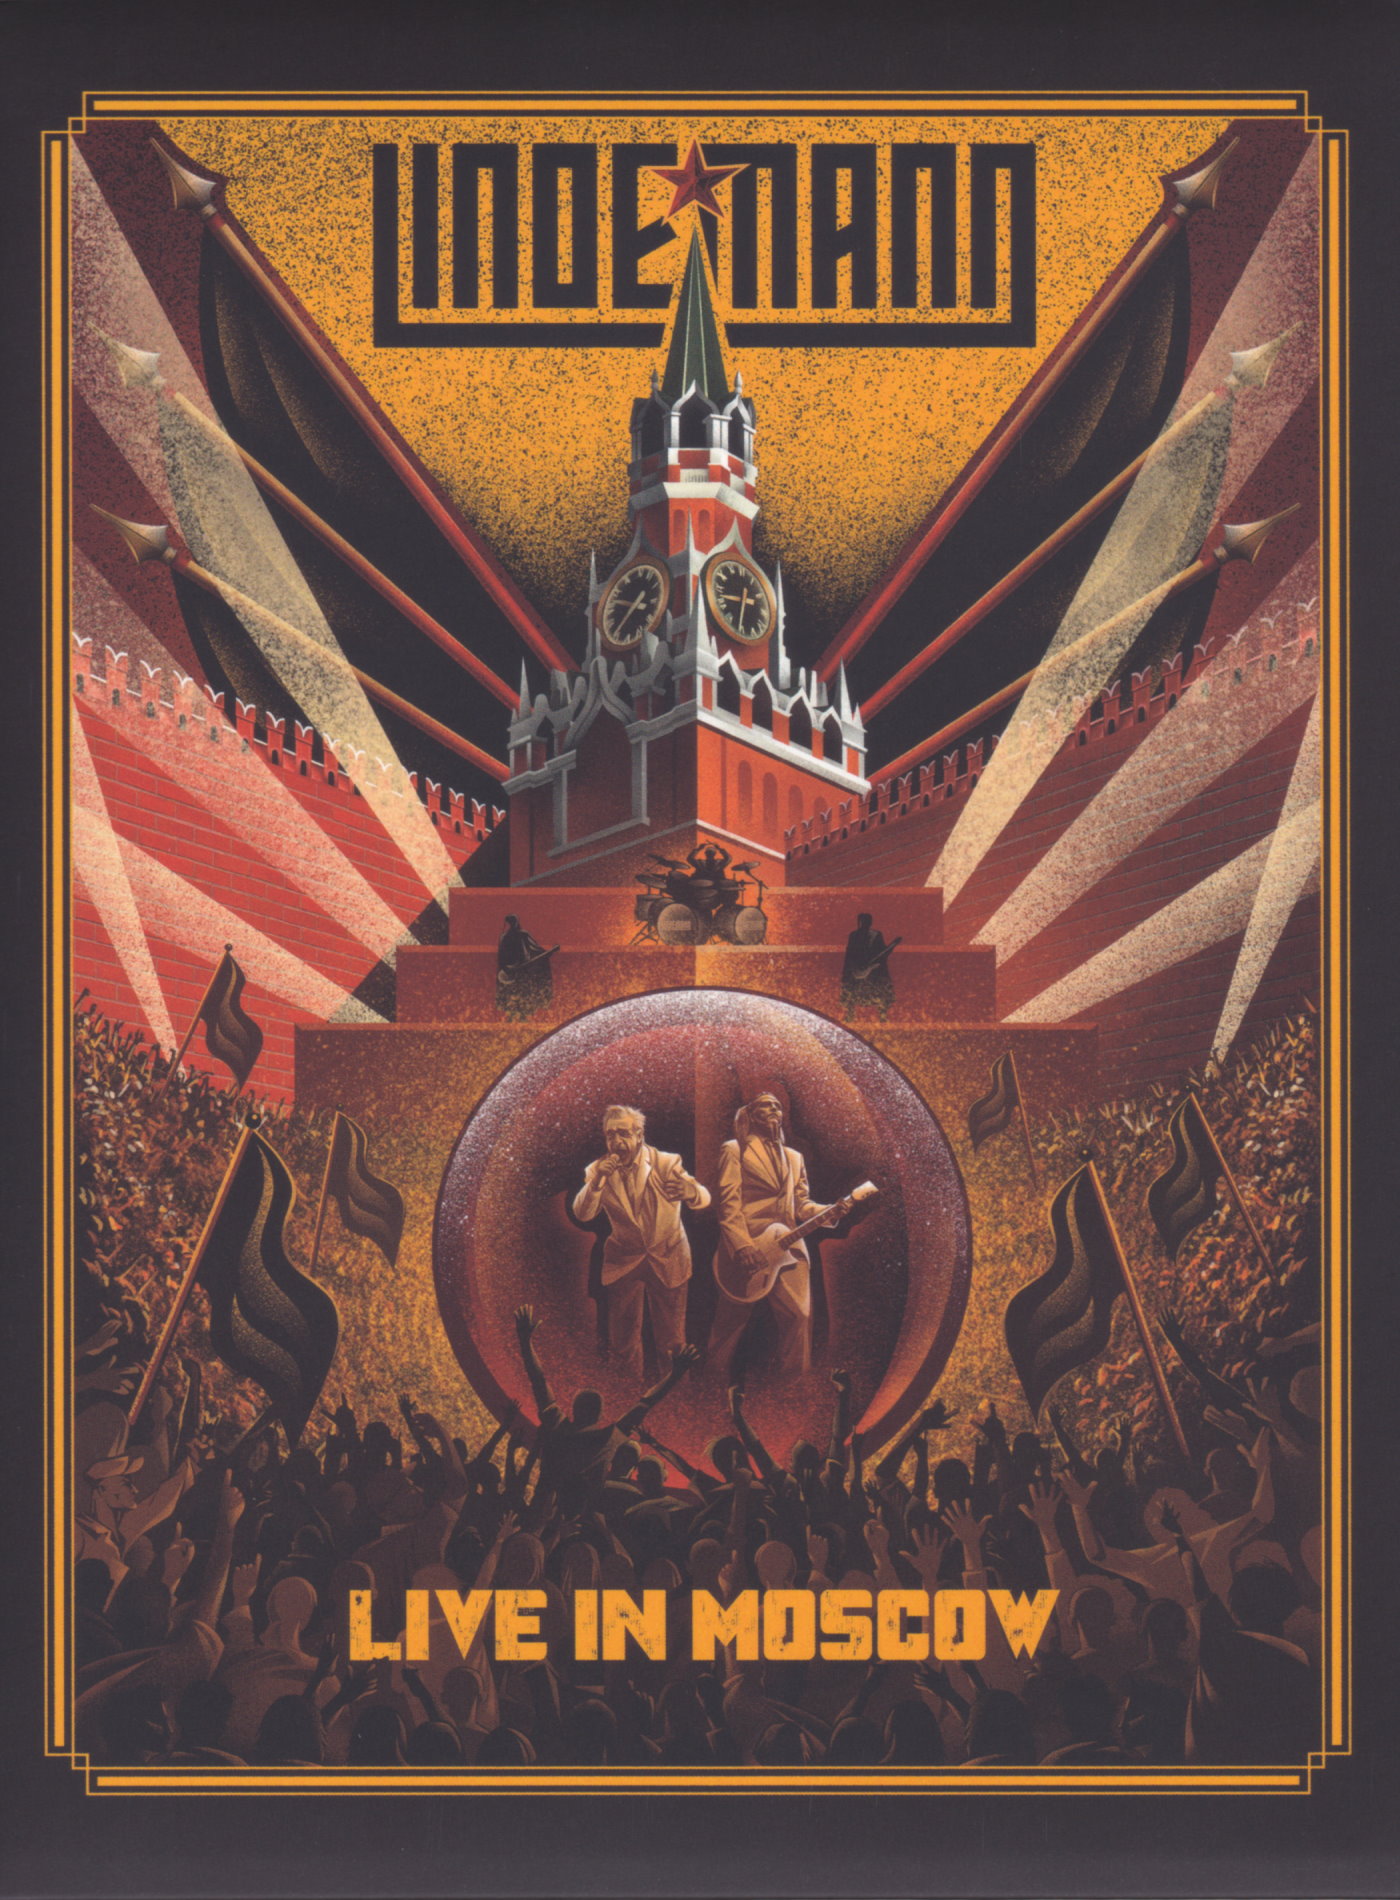 Cover - Lindemann - Live in Moscow.jpg